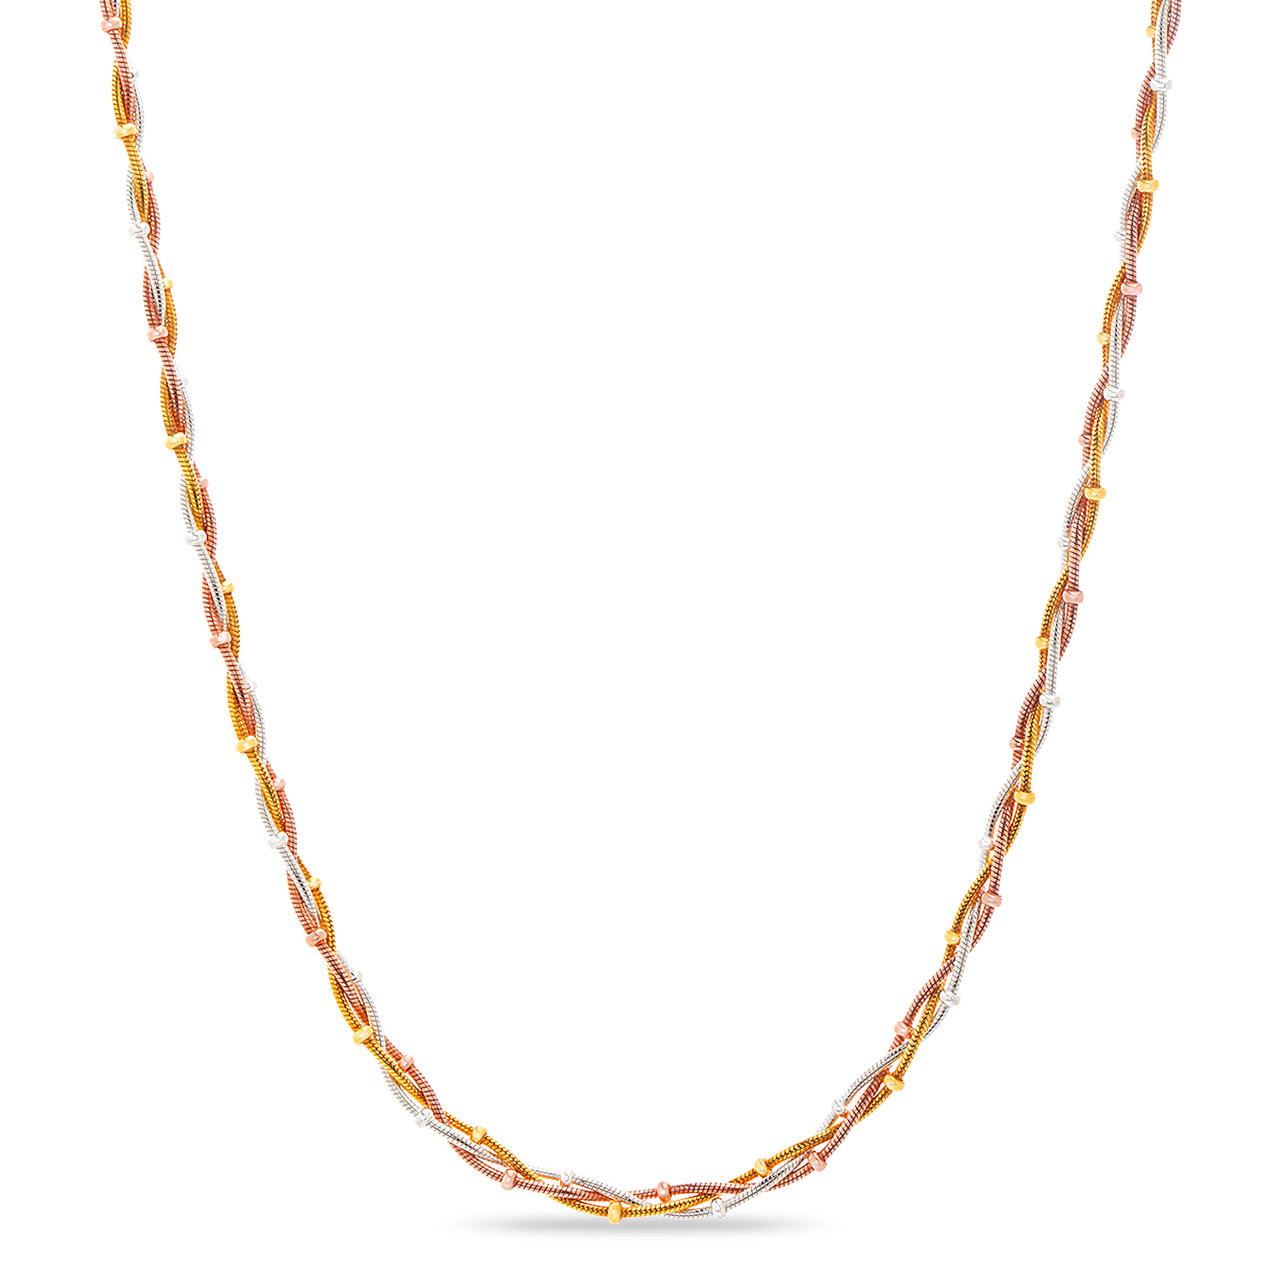 Aubrey Lee 18" Sterling Silver Twisted Bead Chain with Tri Color Plating